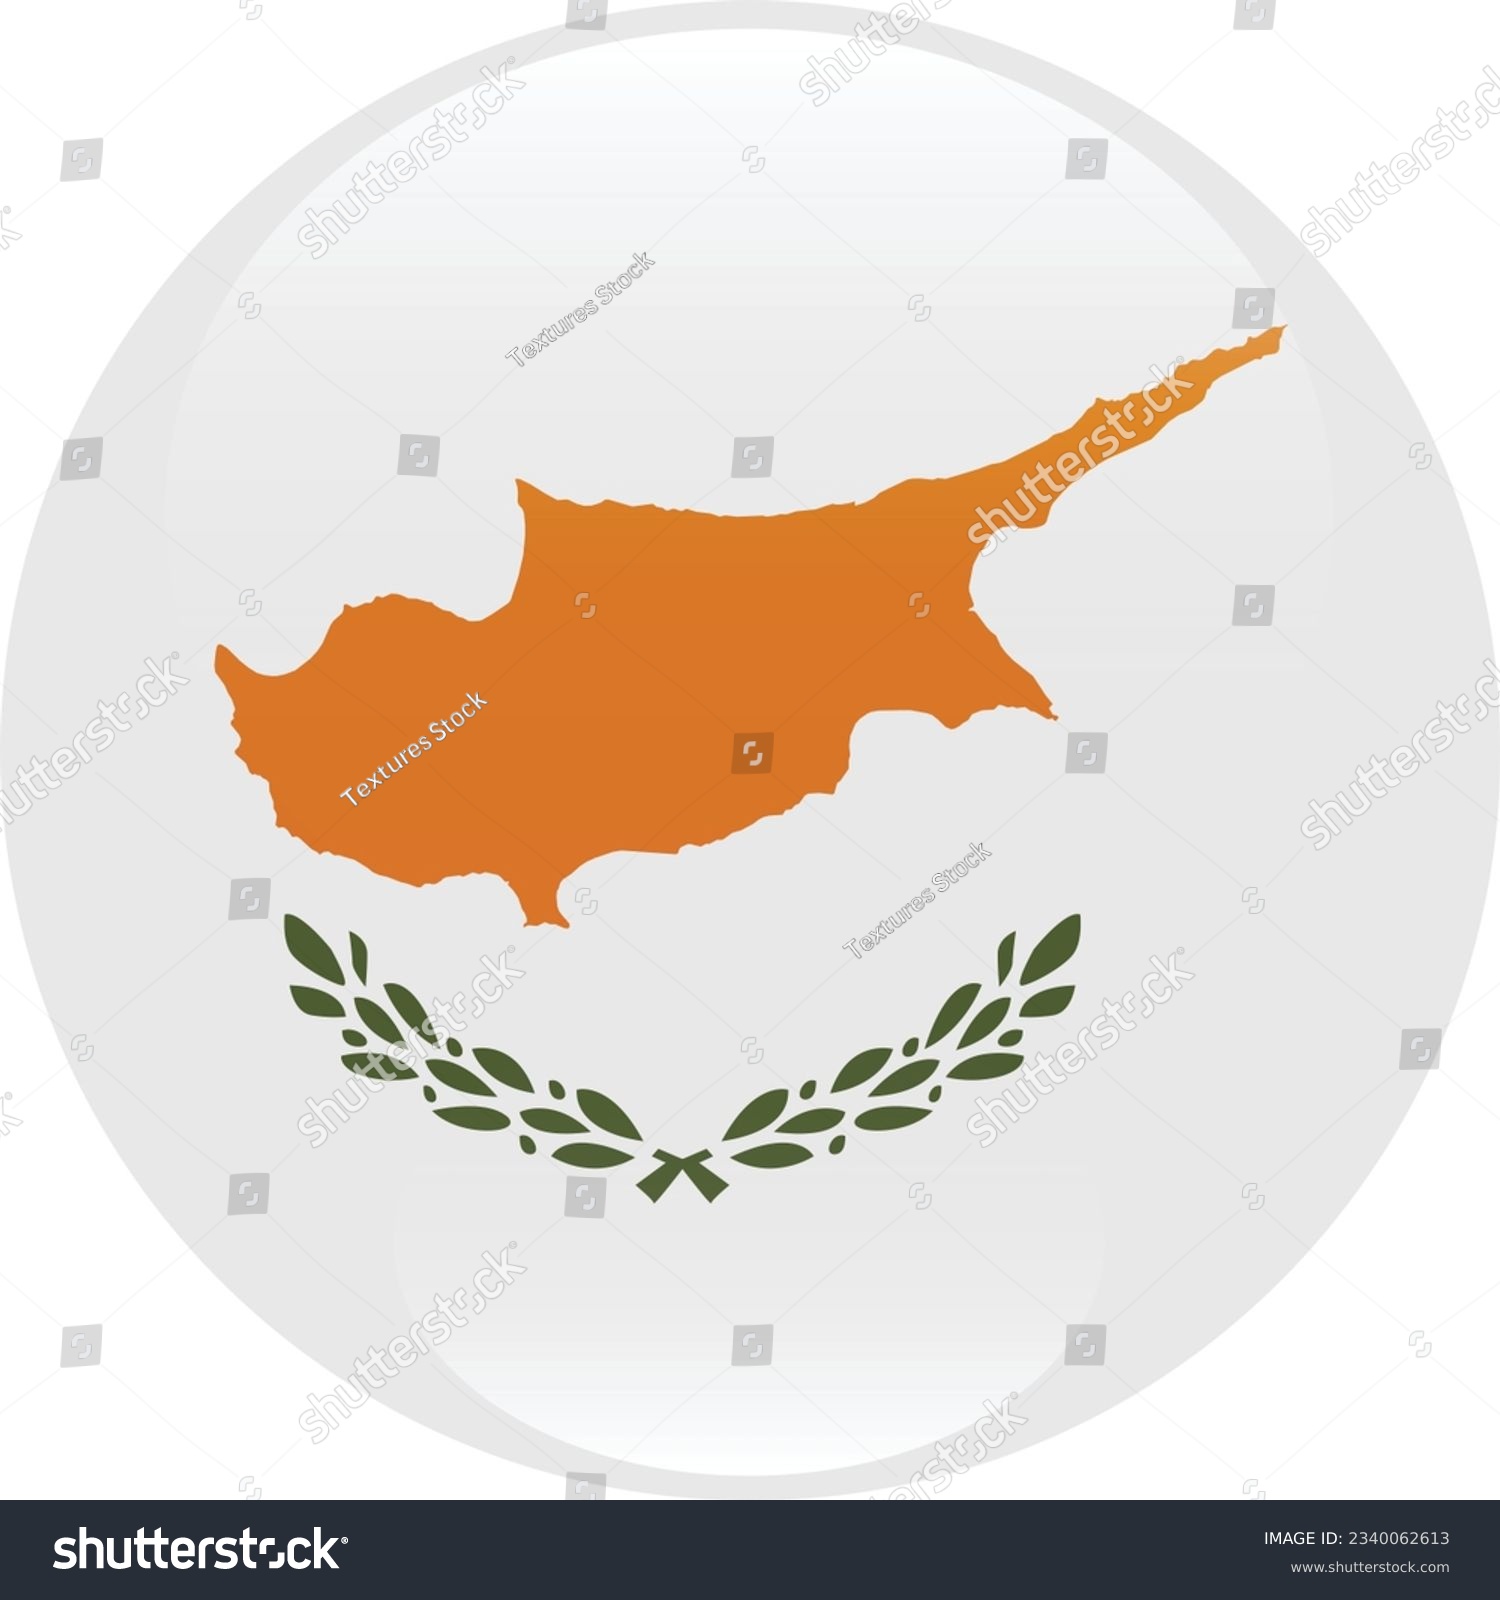 SVG of The flag of Cyprus. Flag icon. Standard color. Circle icon flag. 3d illustration. Computer illustration. Digital illustration. Vector illustration. svg